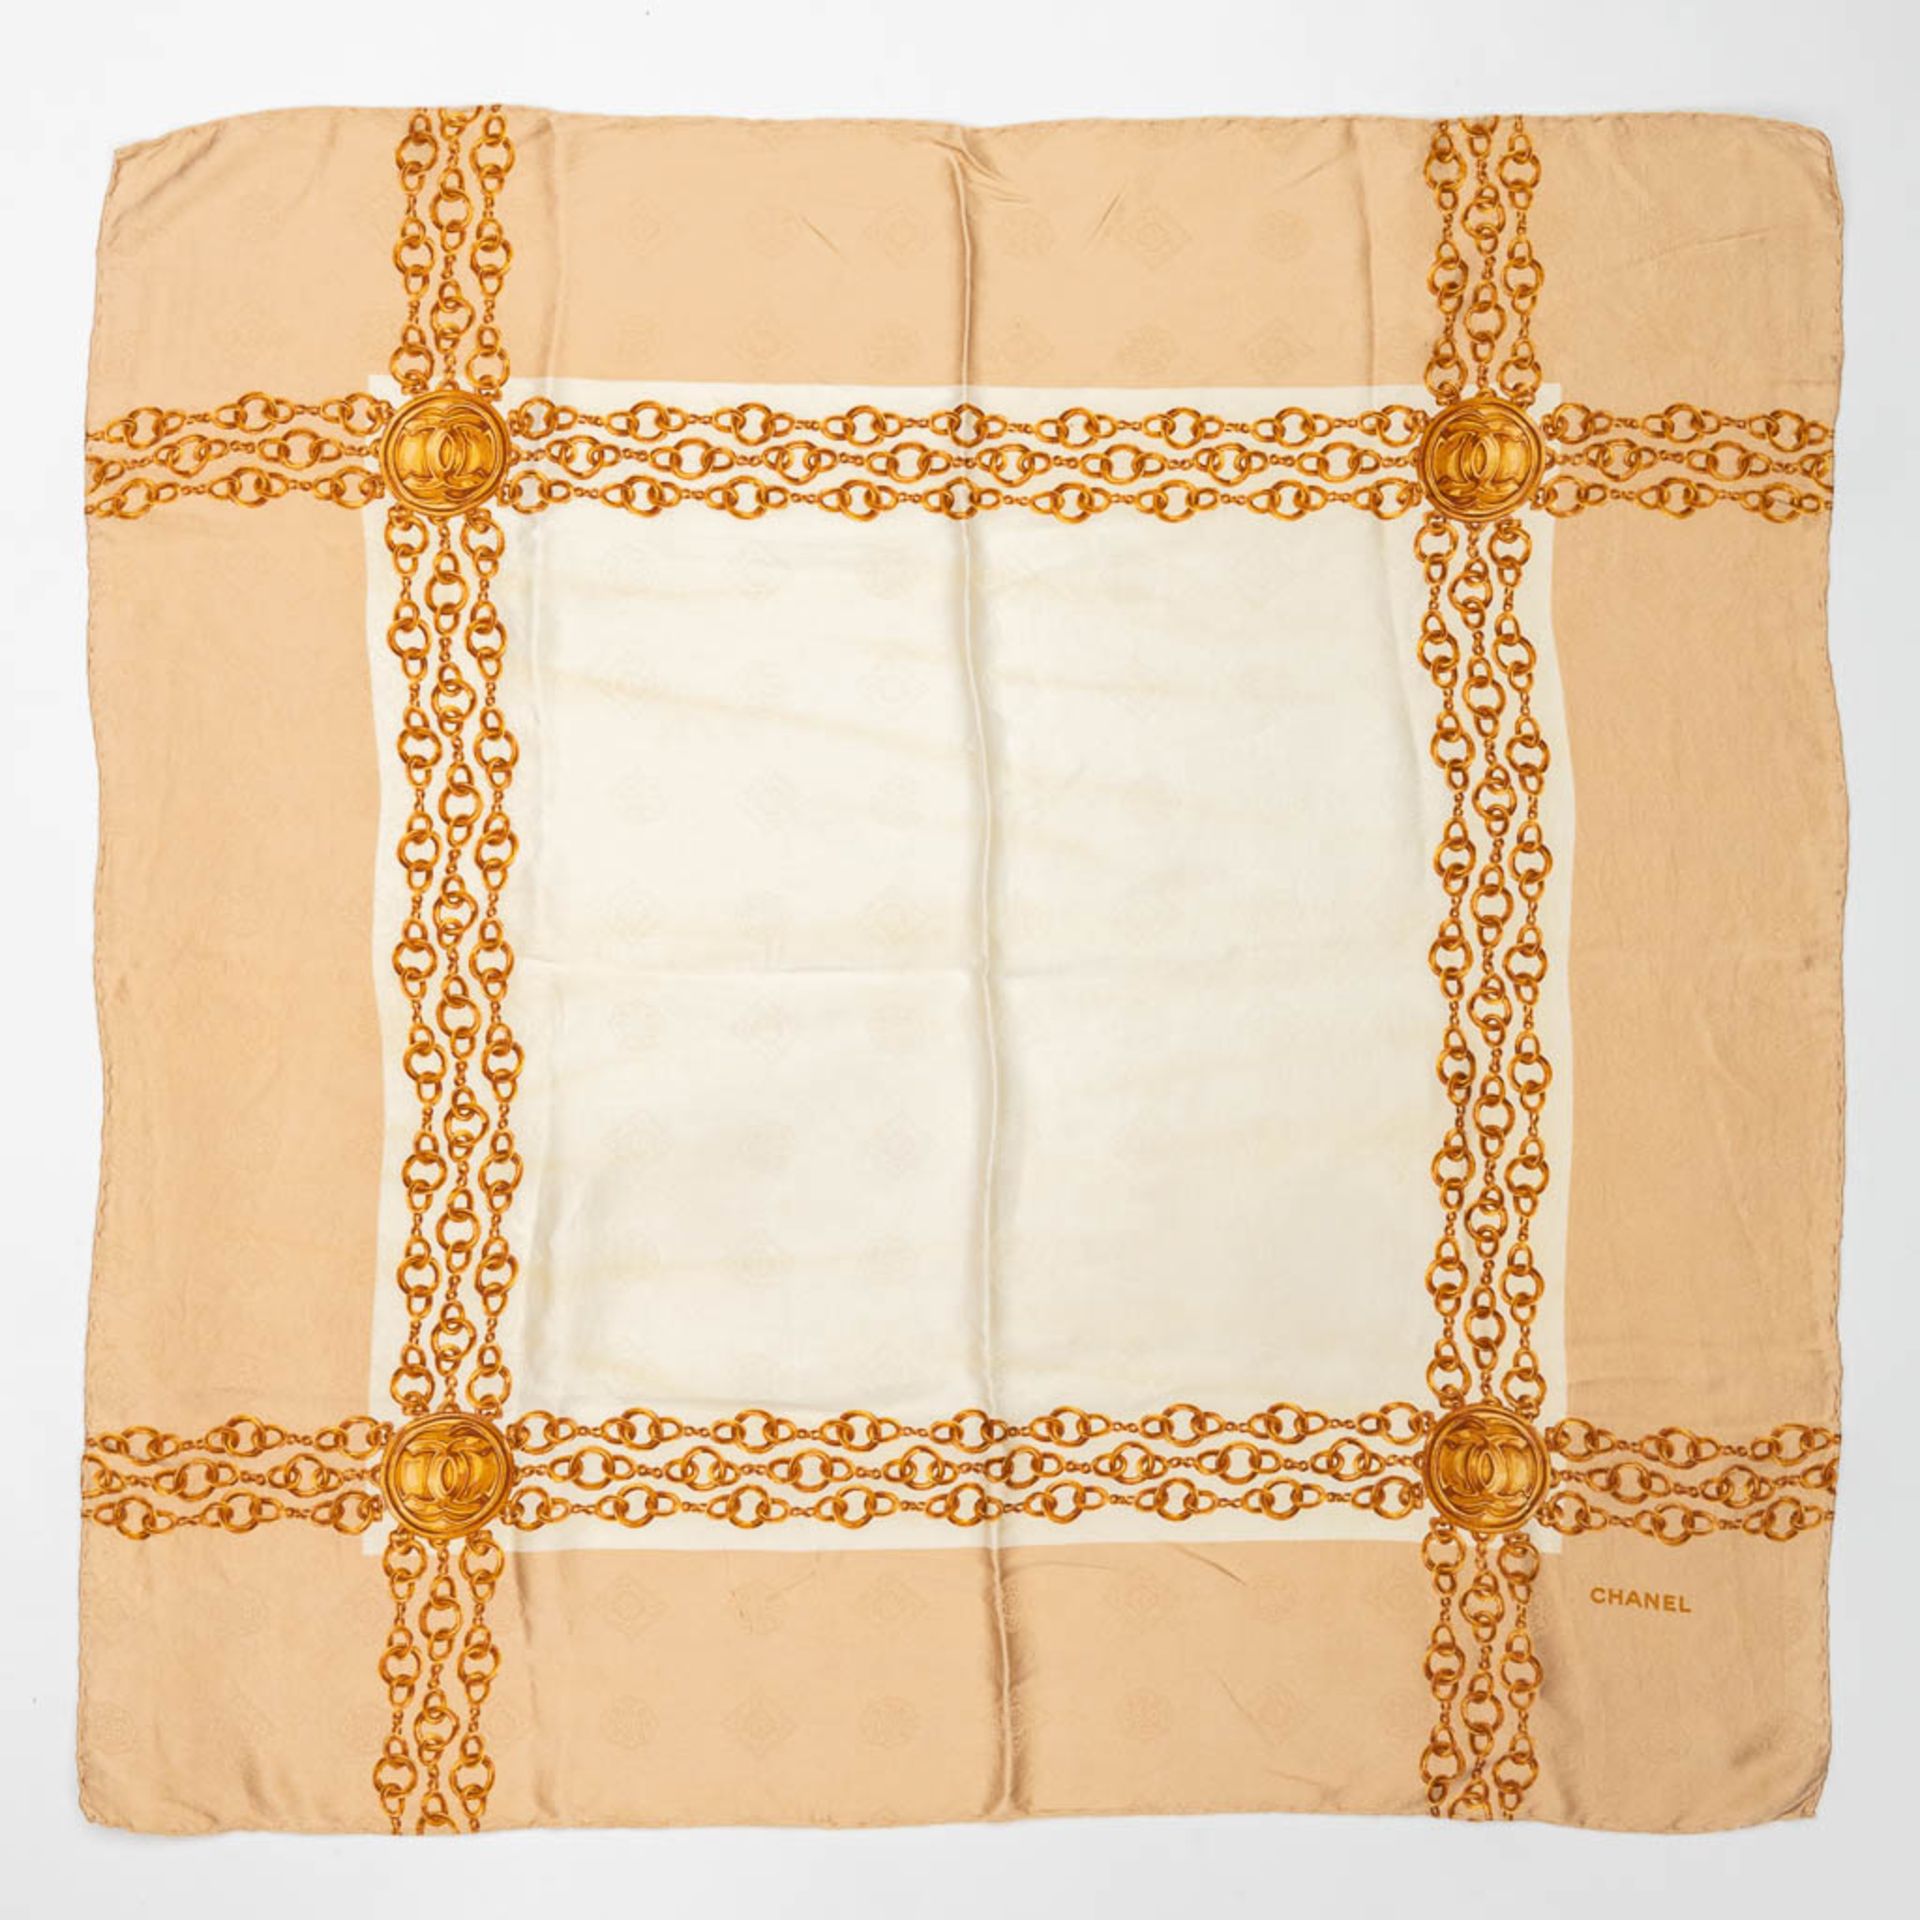 Chanel, a collection of 3 silk scarfs. (L: 86 x W: 86 cm) - Image 14 of 28